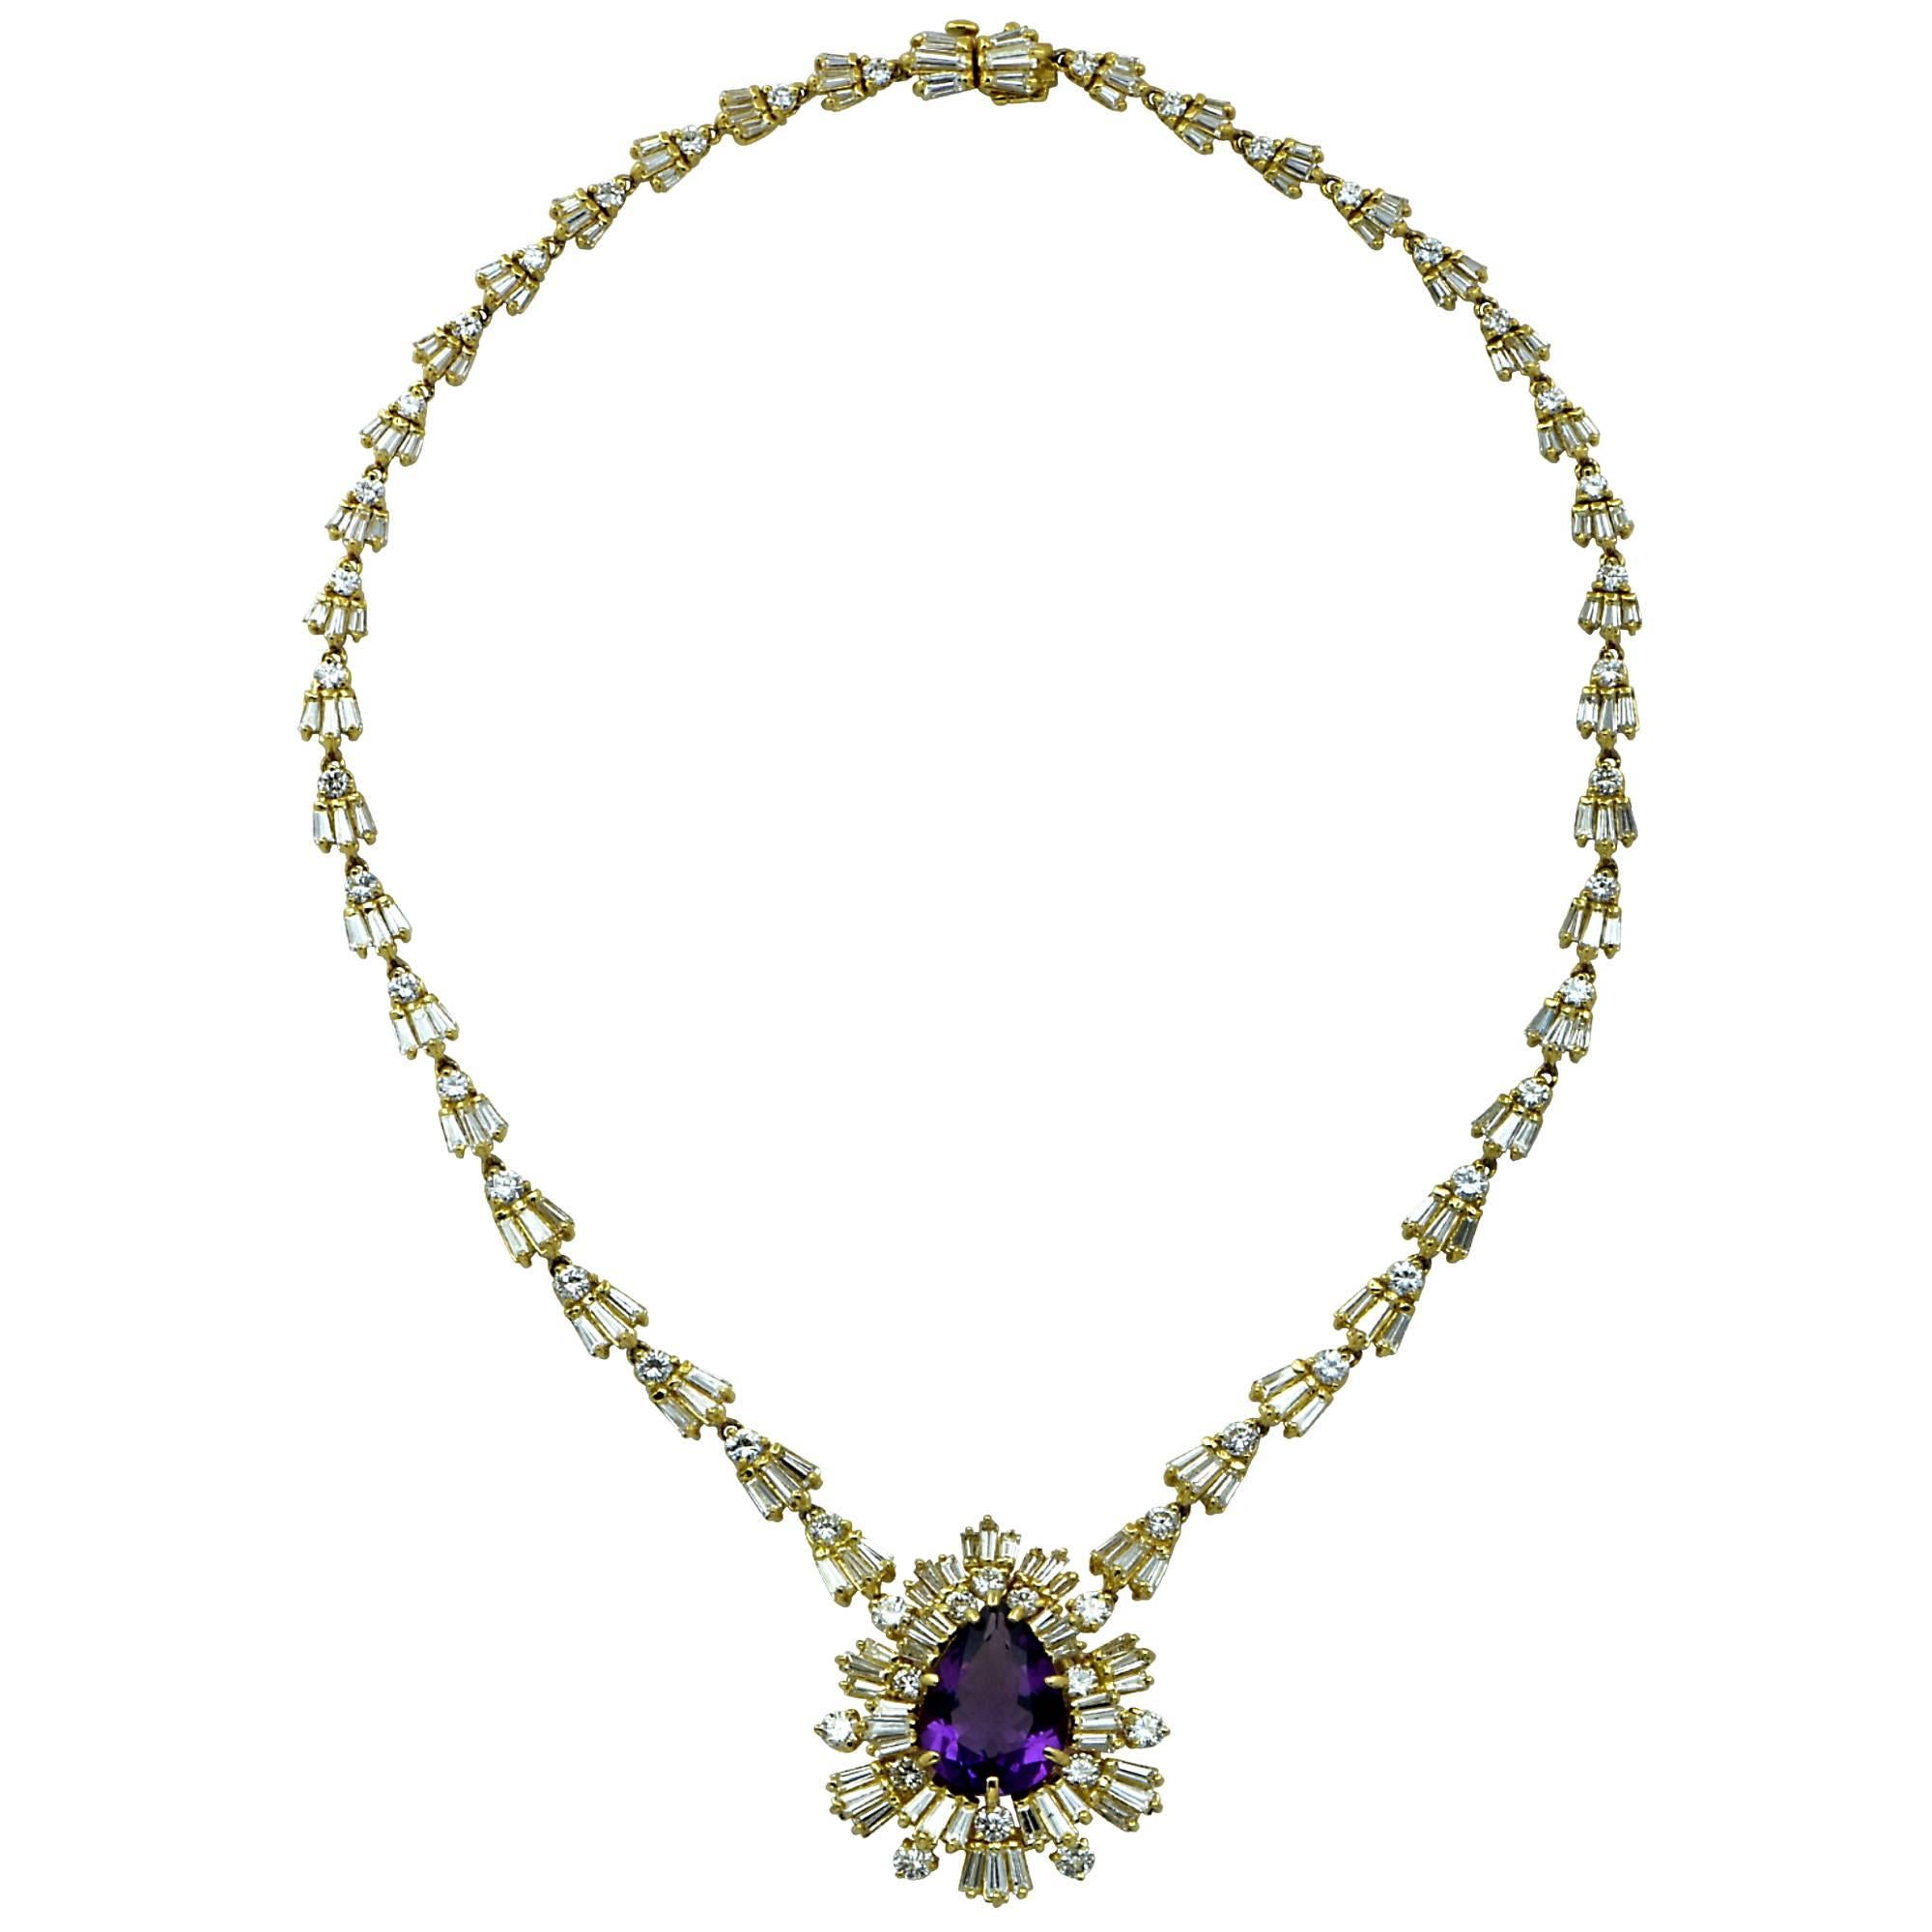 18K Yellow gold necklace showcasing an 8.6ct pear shape purple amethyst, surrounded by 162 Baguette shape diamonds weighing approximately 10cts and 52 round brilliant cut diamonds weighing approximately 5.50cts, K color, VS-SI clarity. This necklace